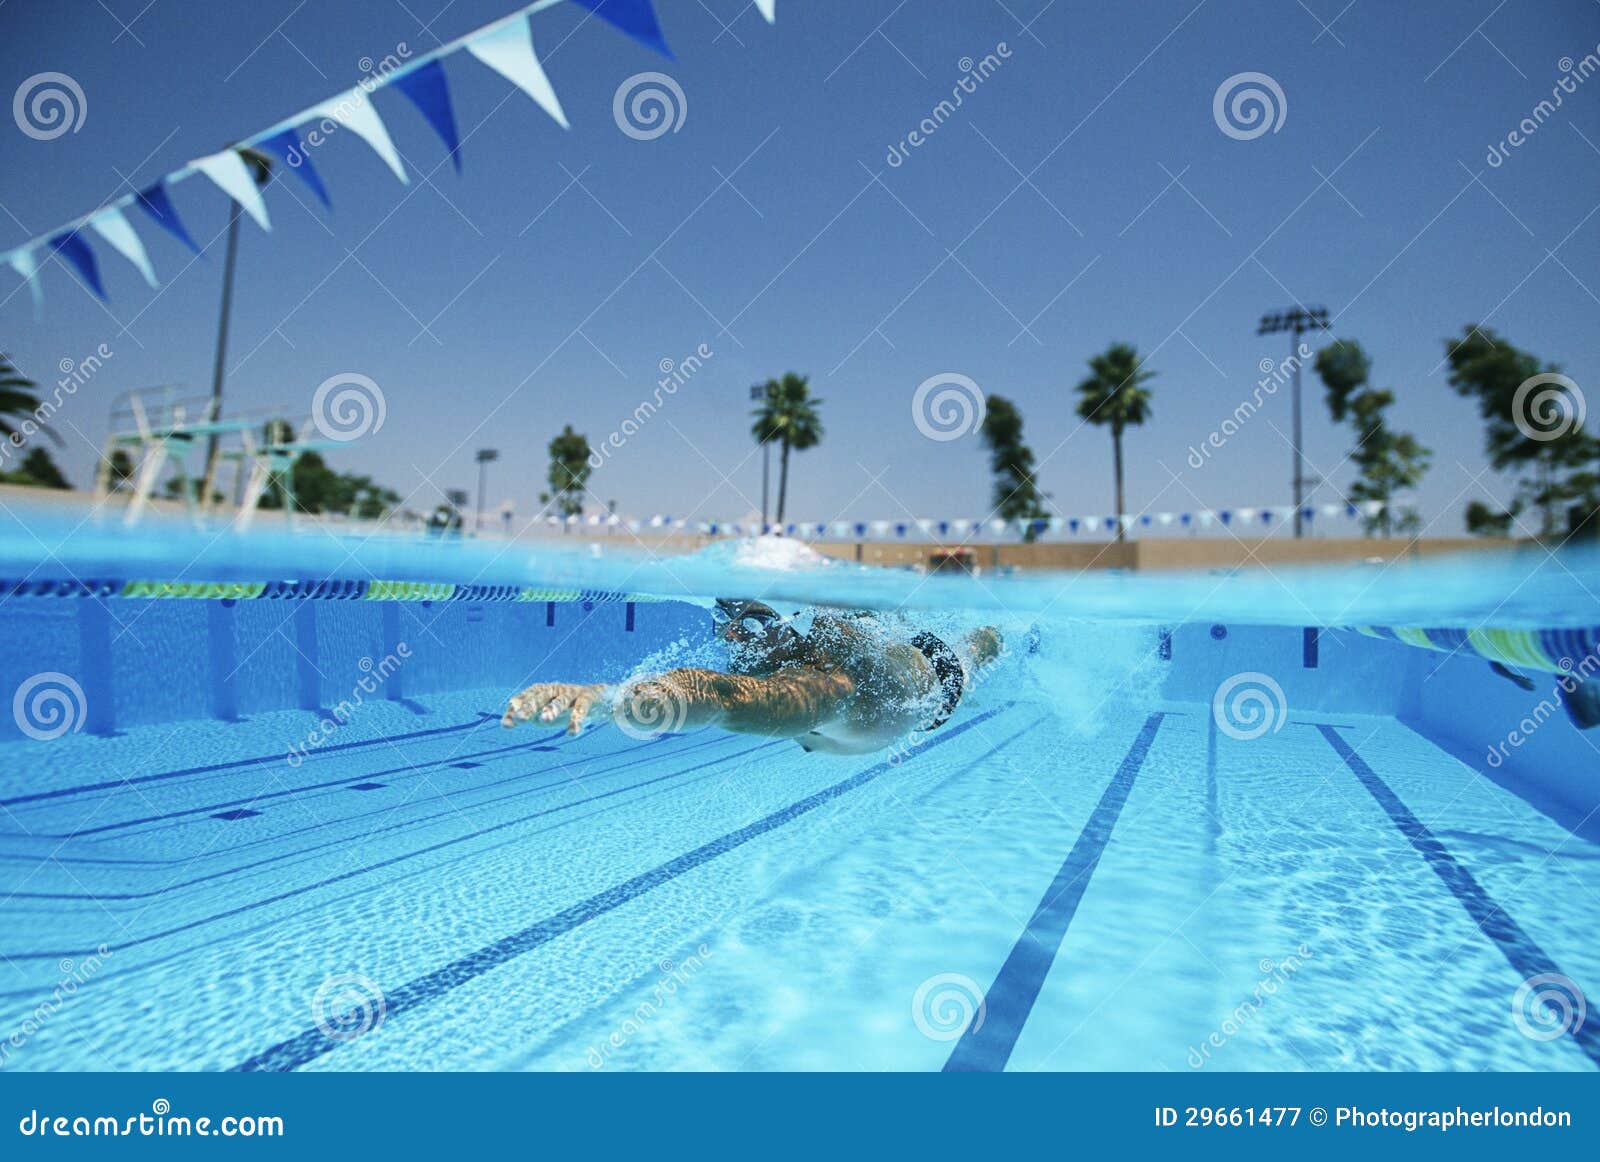 swimmer practicing in pool